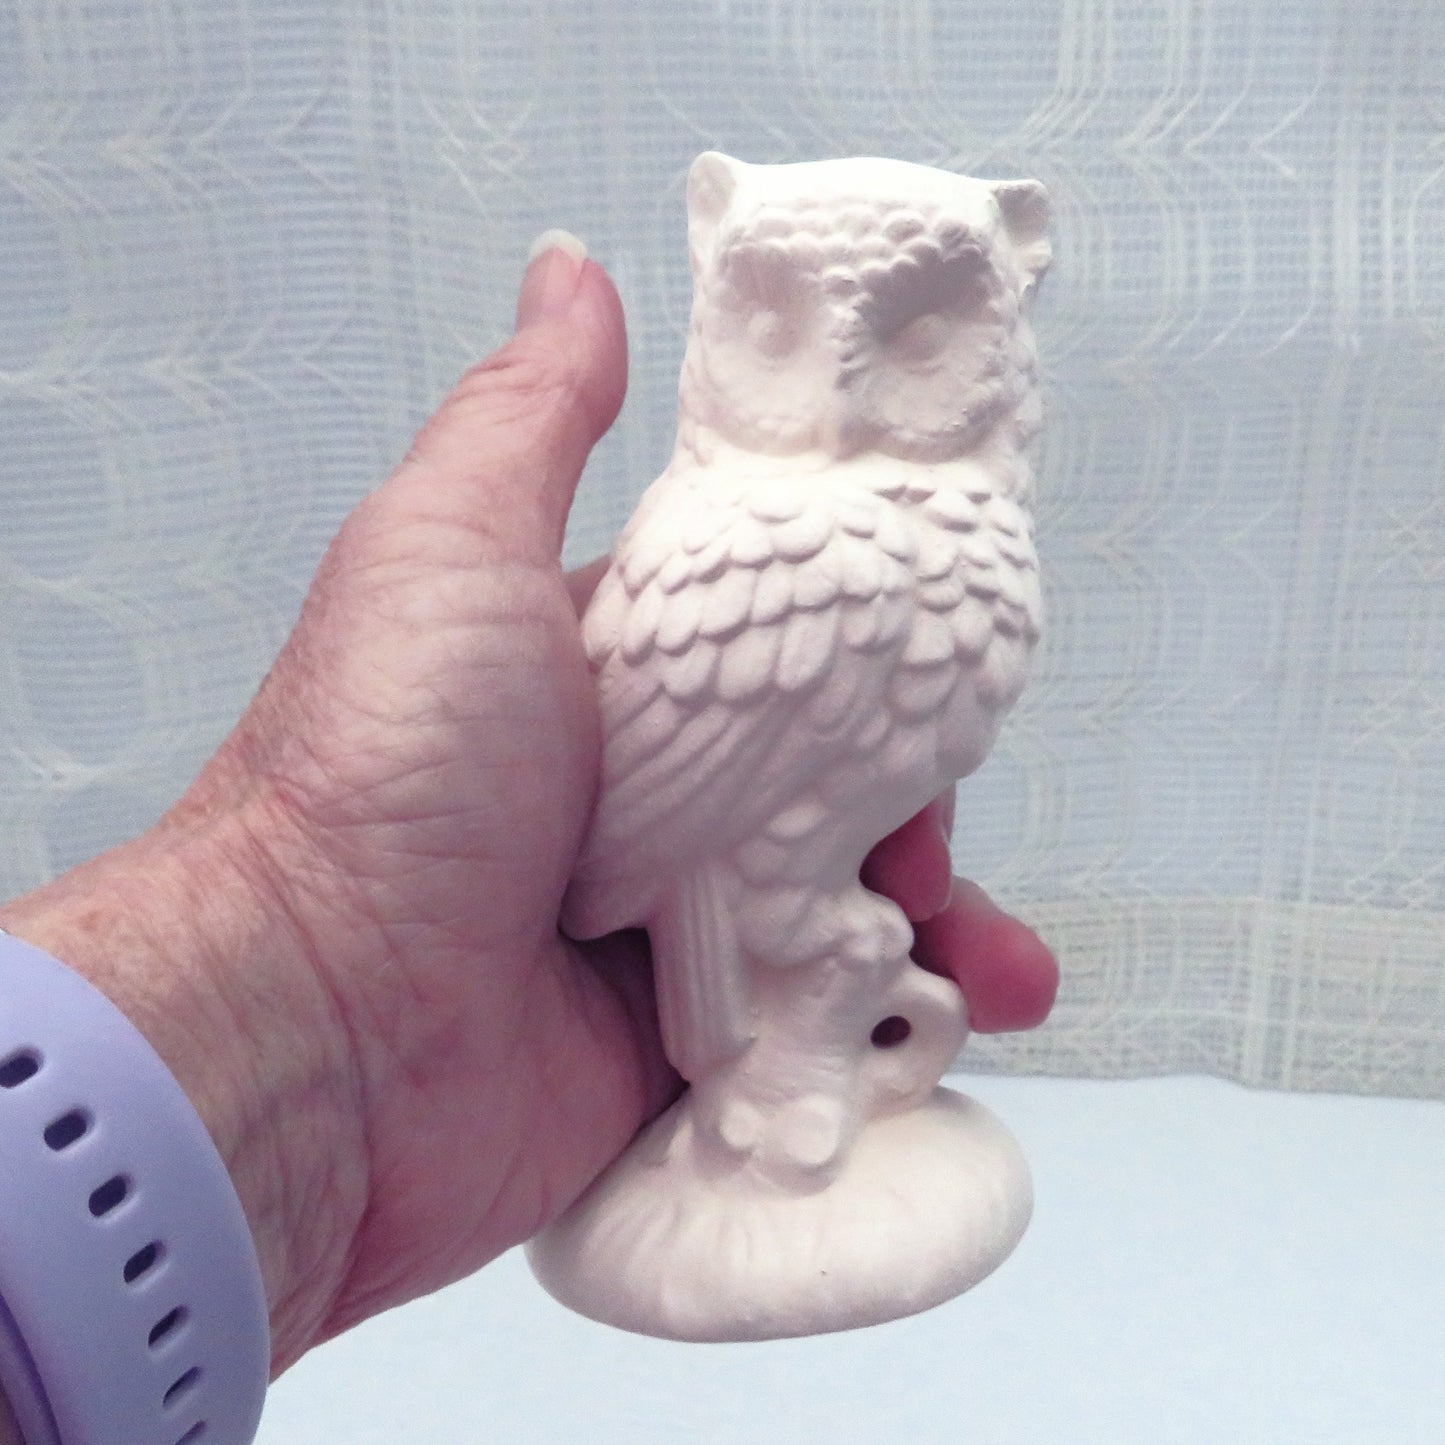 Handmade ceramic owl in my hand for size comparison.